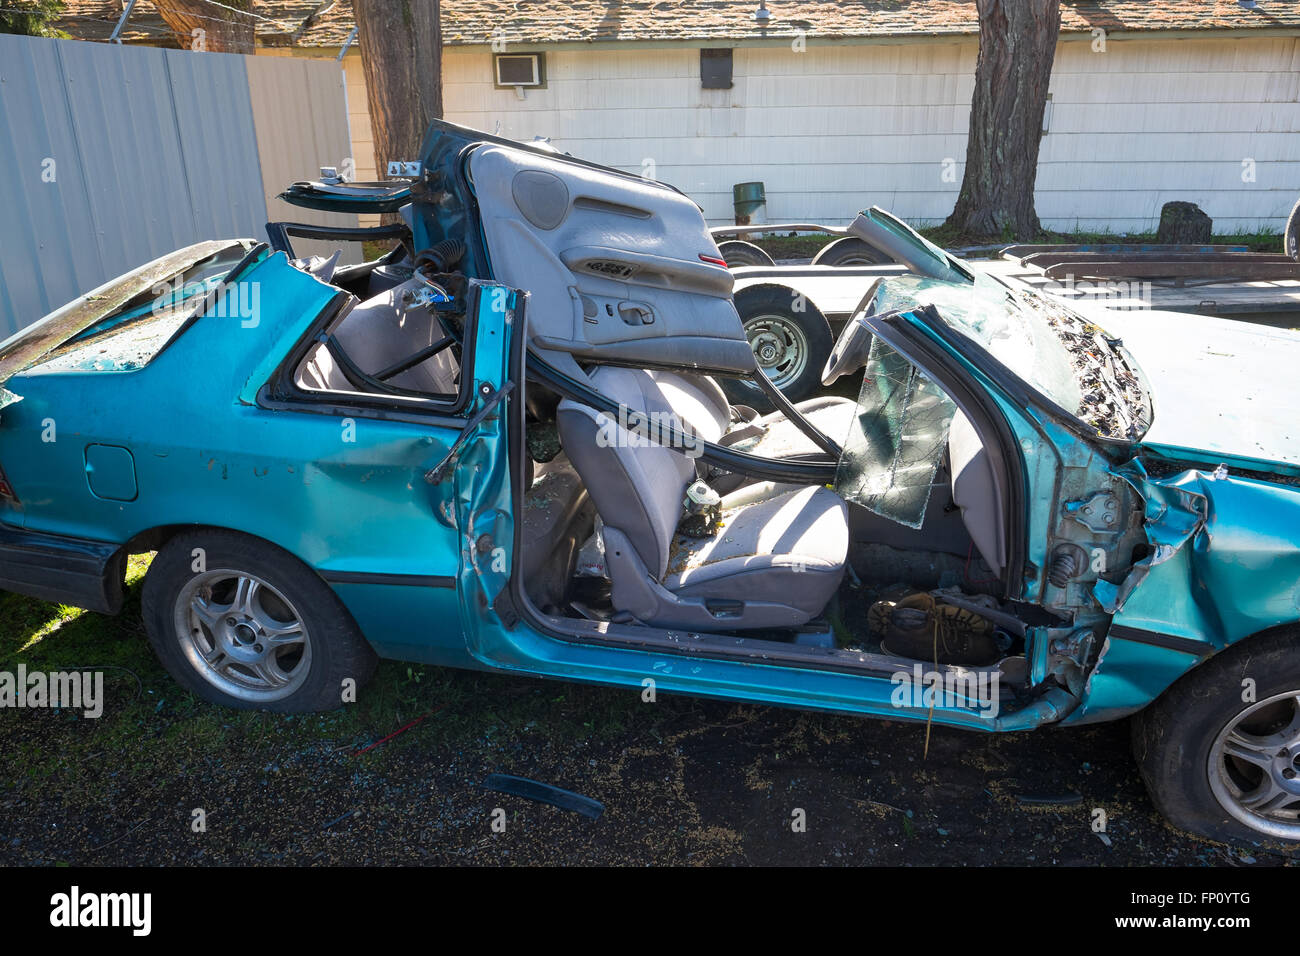 OAKRIDGE, OR - FEBRUARY 23, 2016: Doors are cut away from this vehicle after the jaws of life were used to rescue the driver ser Stock Photo